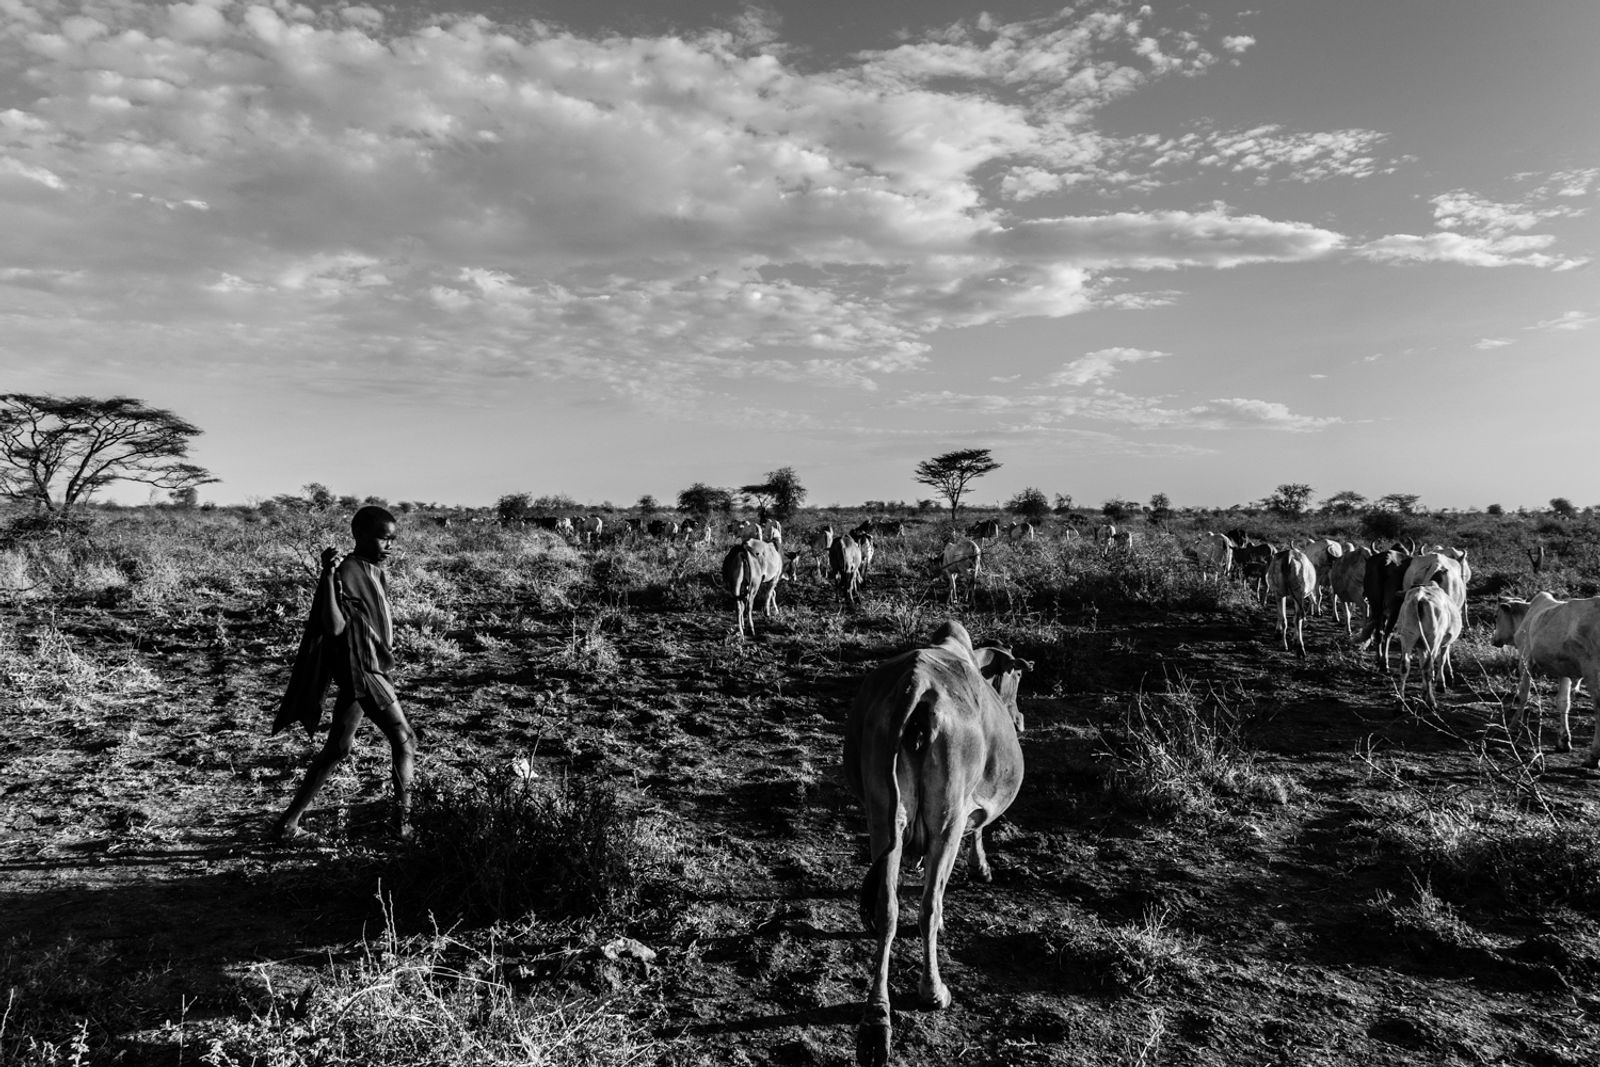 © Kristof Vadino - Image from the Drought photography project